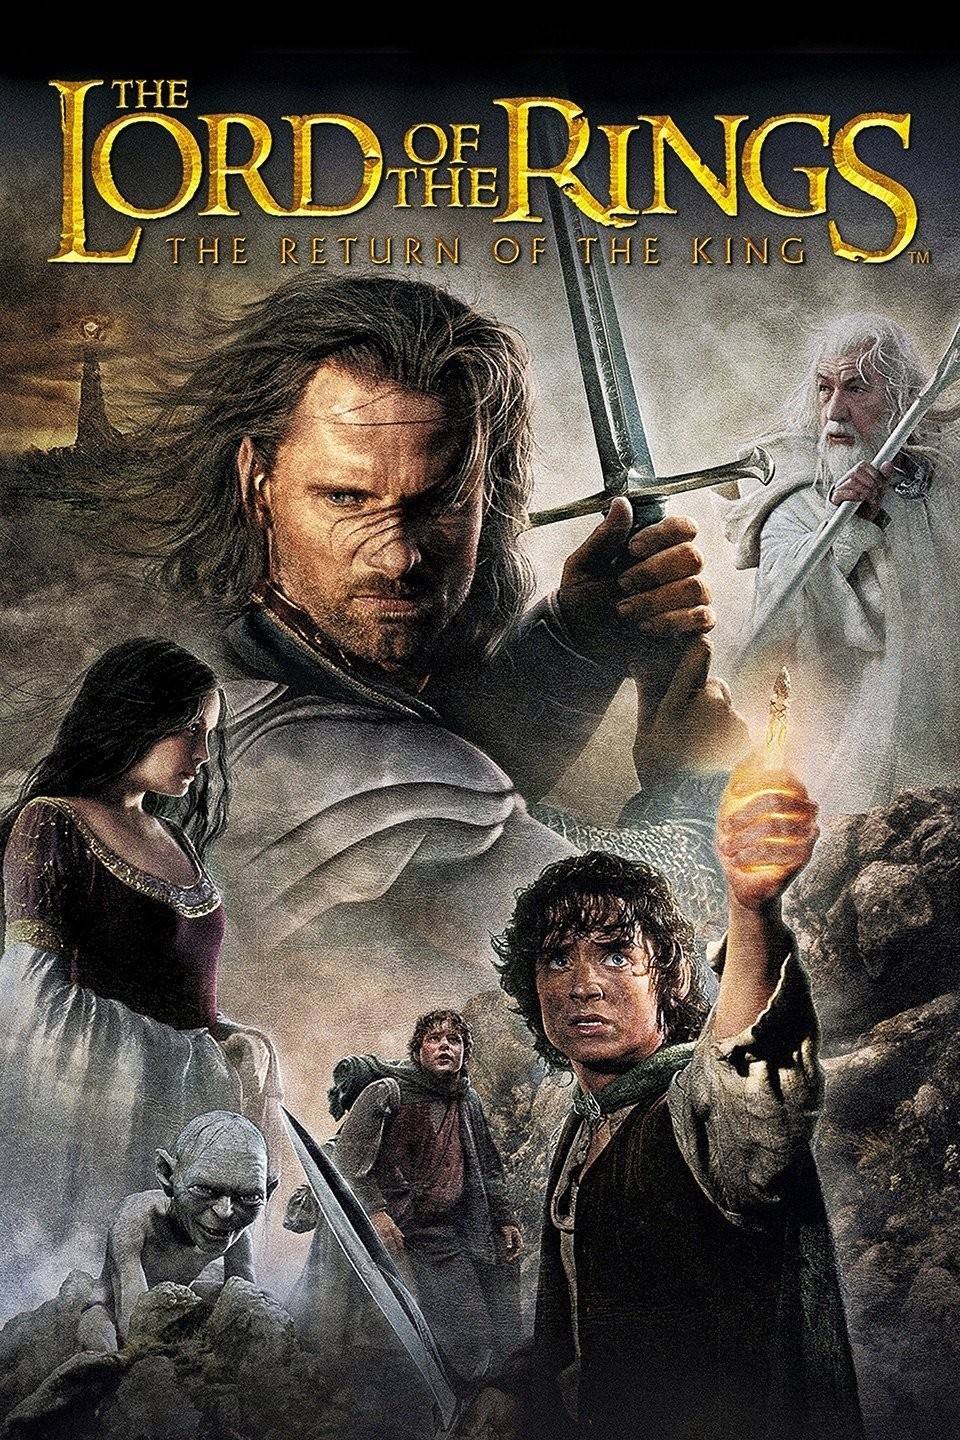 The Lord Of The Rings - Full Trilogy Screening - Welcome To Perth